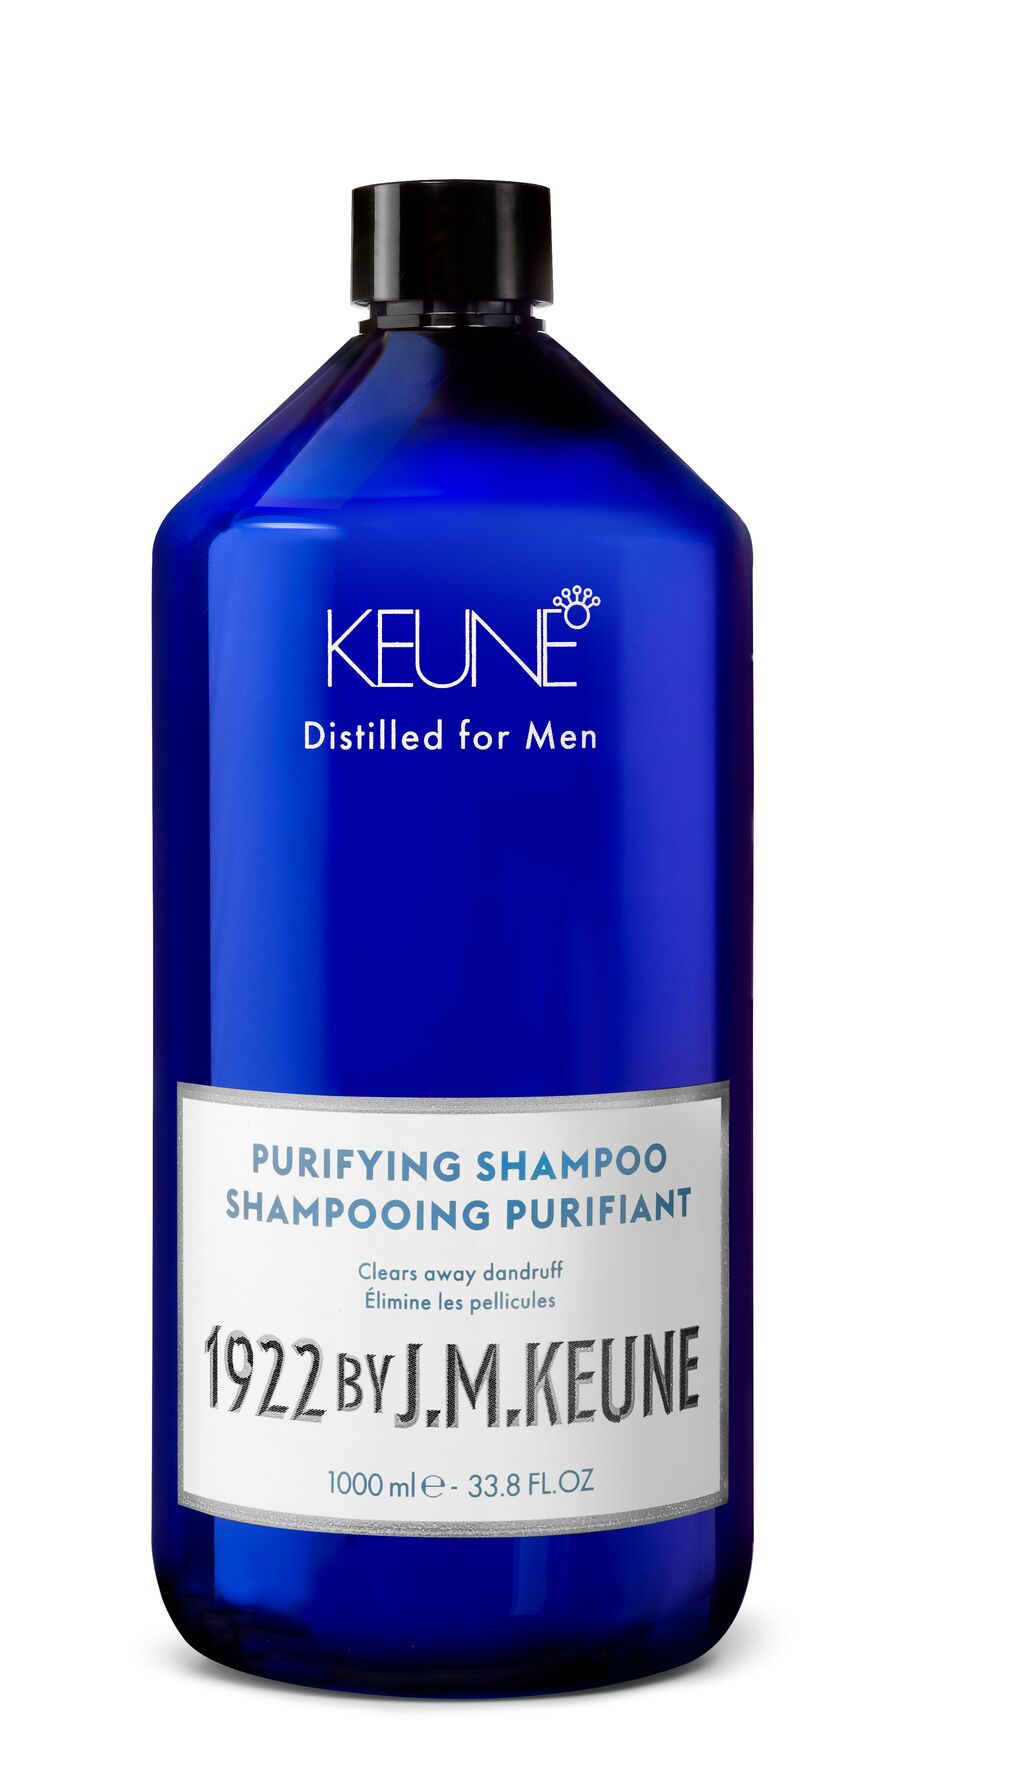 Effective shampoo for men with oily hair: Dandruff-free with zinc pyrithione and strengthened hair through creatine. Learn more about our 1922 Purifying Shampoo.